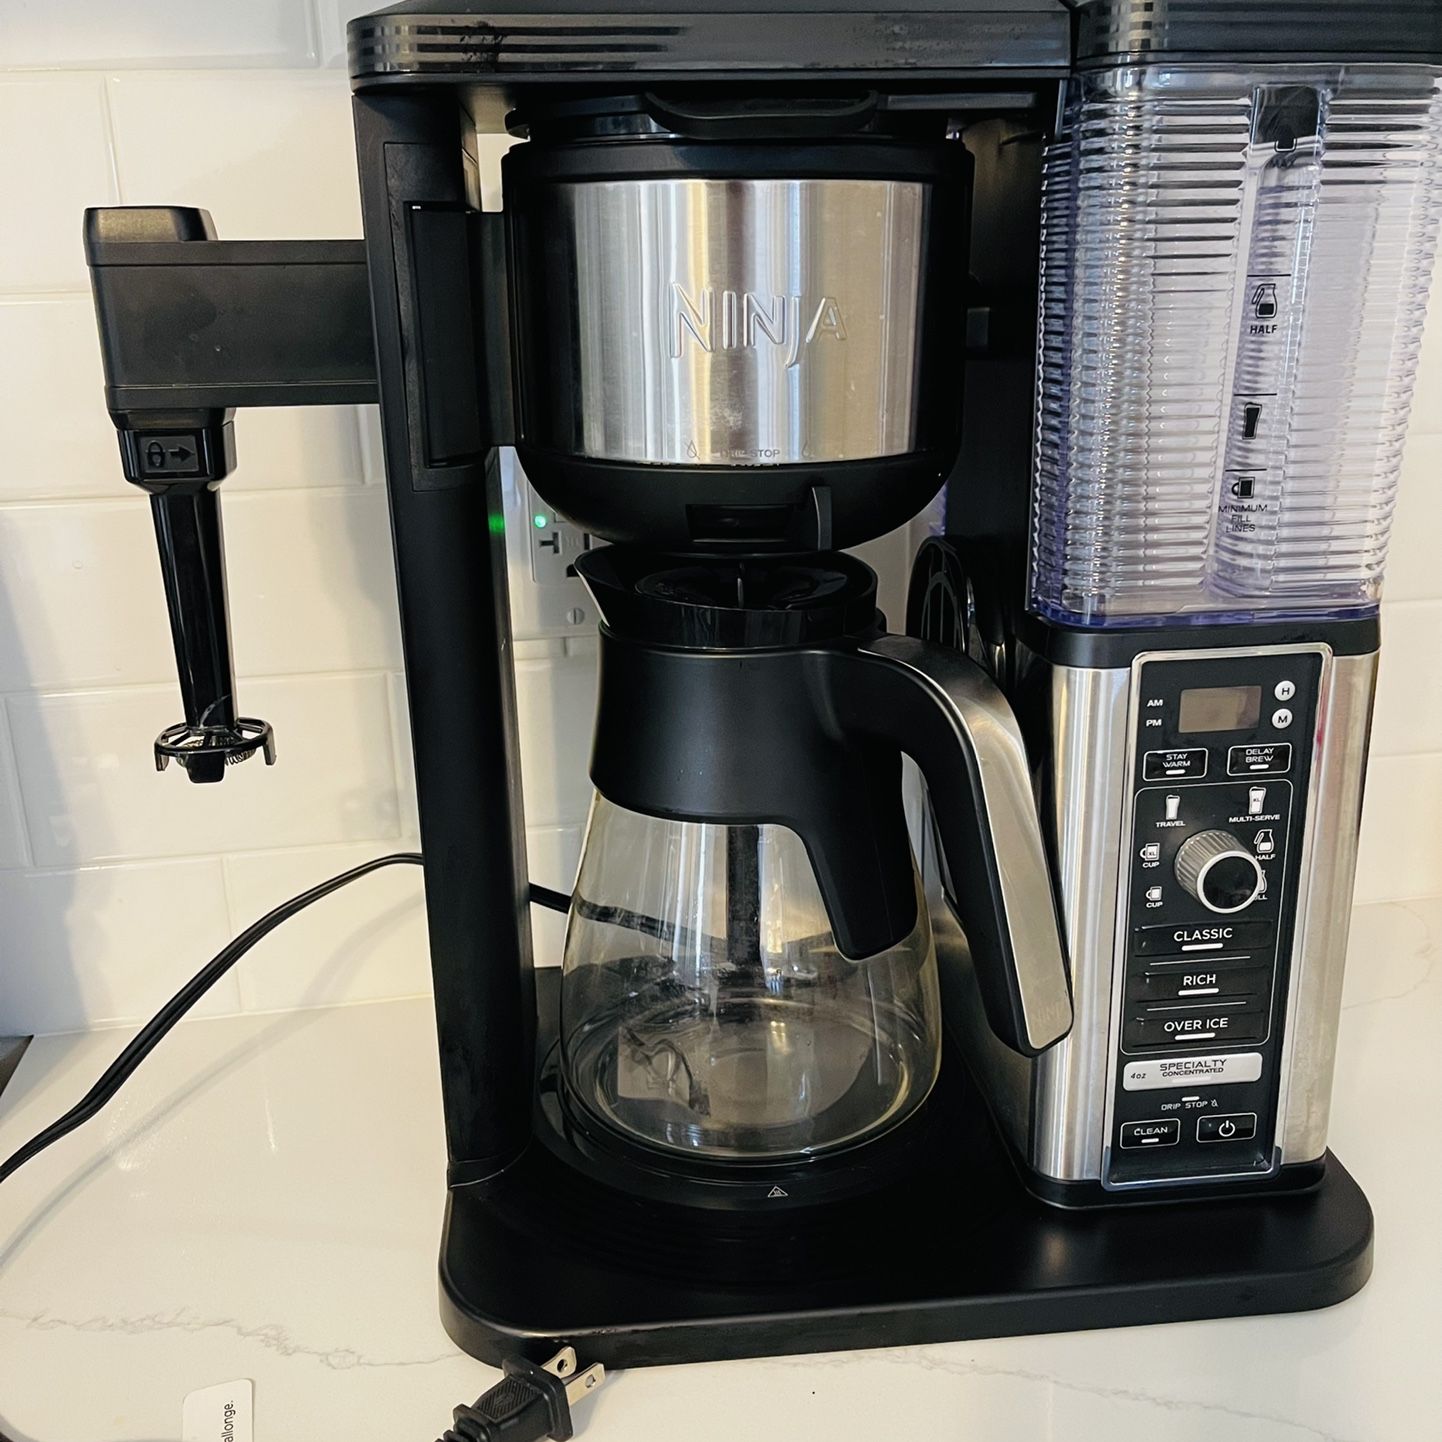 Ninja CM401 Specialty 10-Cup Coffee Maker, with 4 Brew Styles for Ground  Coffee, Built-in Water Reservoir, Fold-Away Frother & Glass Carafe, Black  for Sale in Mount Vernon, NY - OfferUp